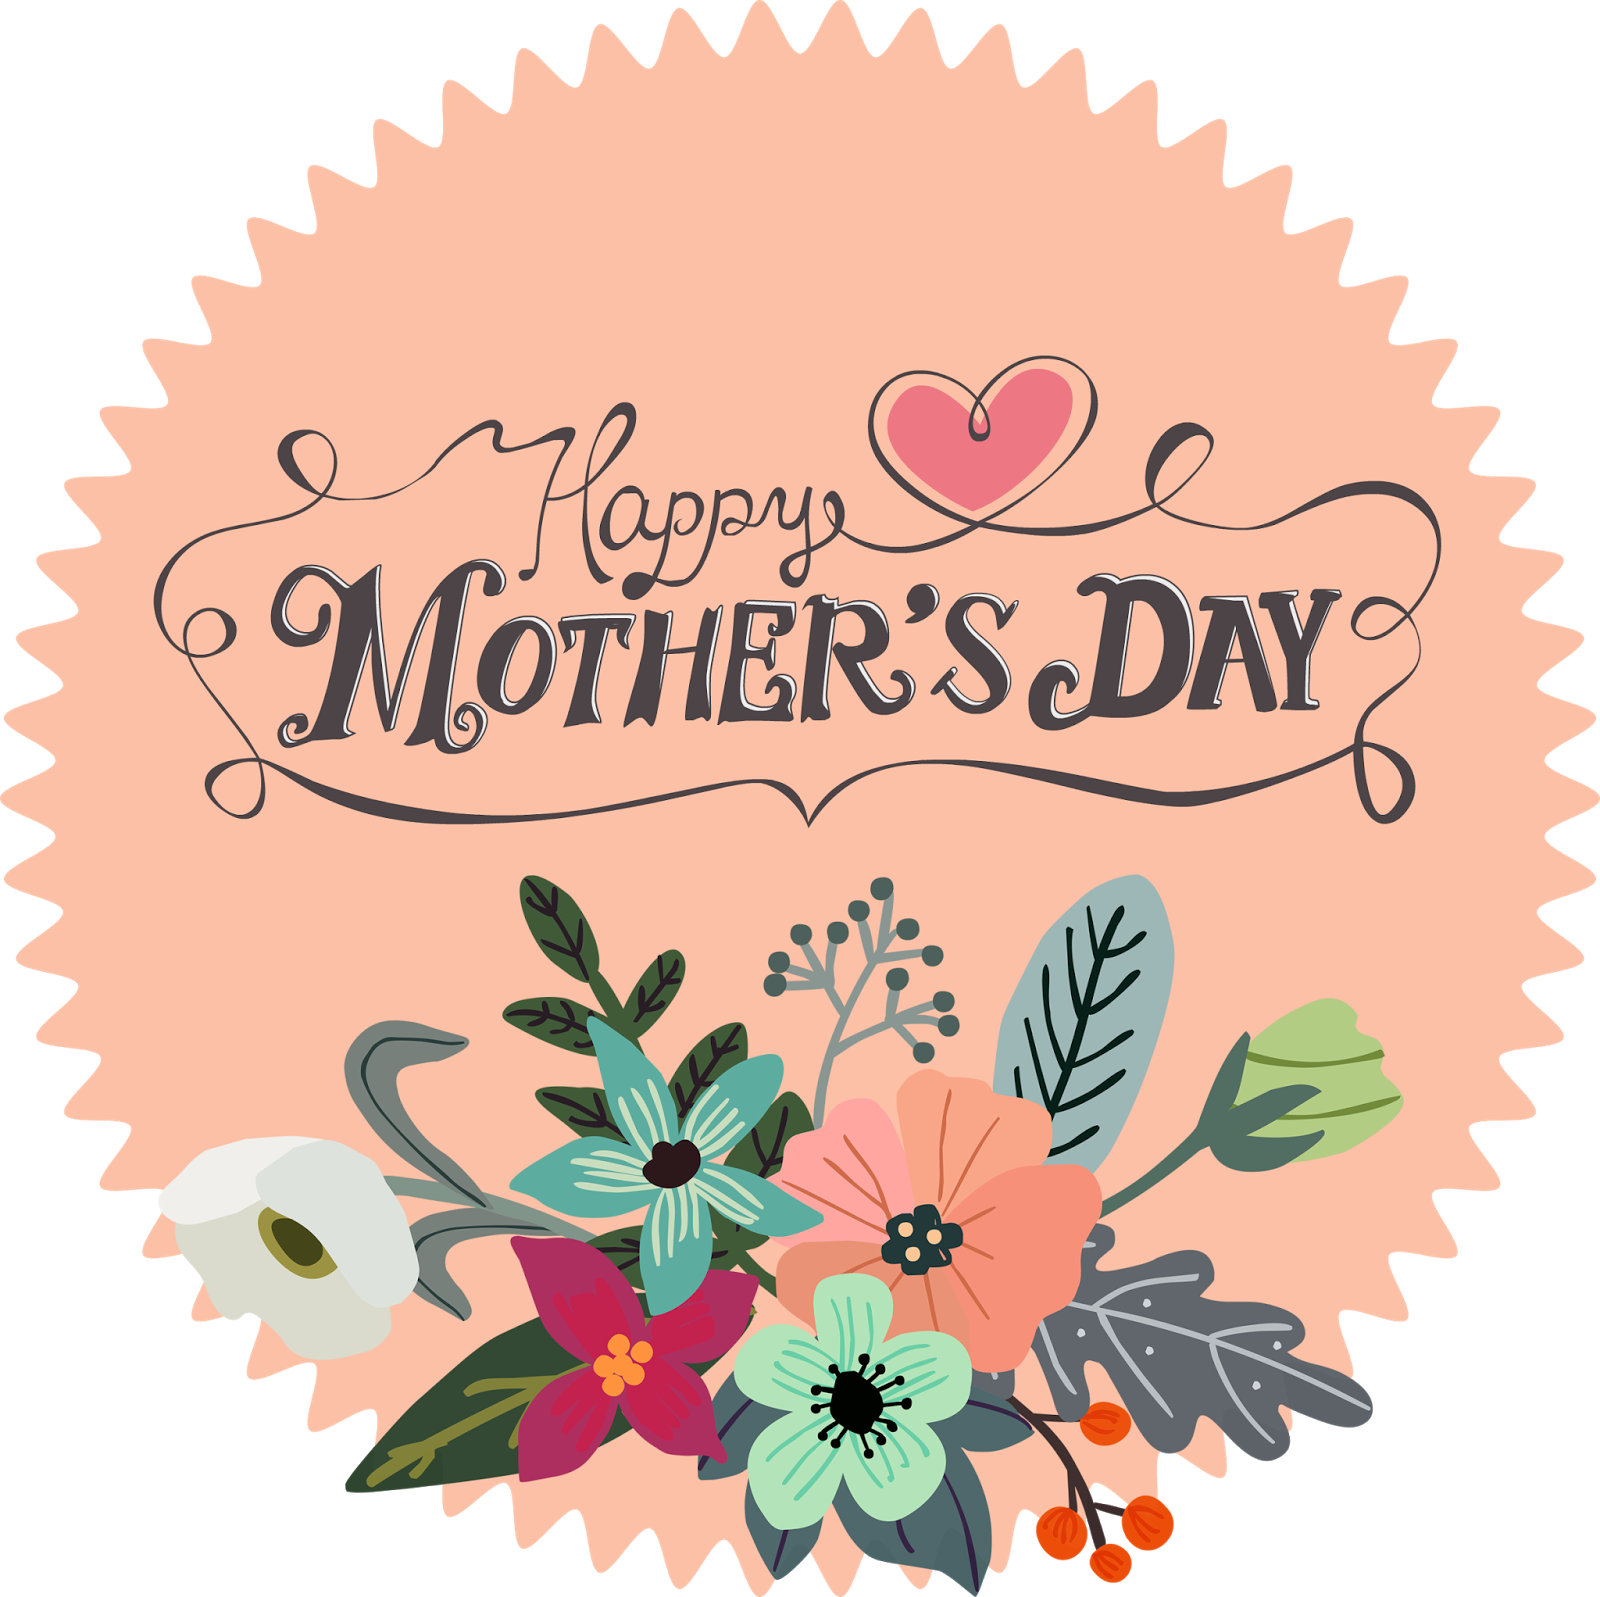 Adventures at Greenacre: Free Mother's Day printable